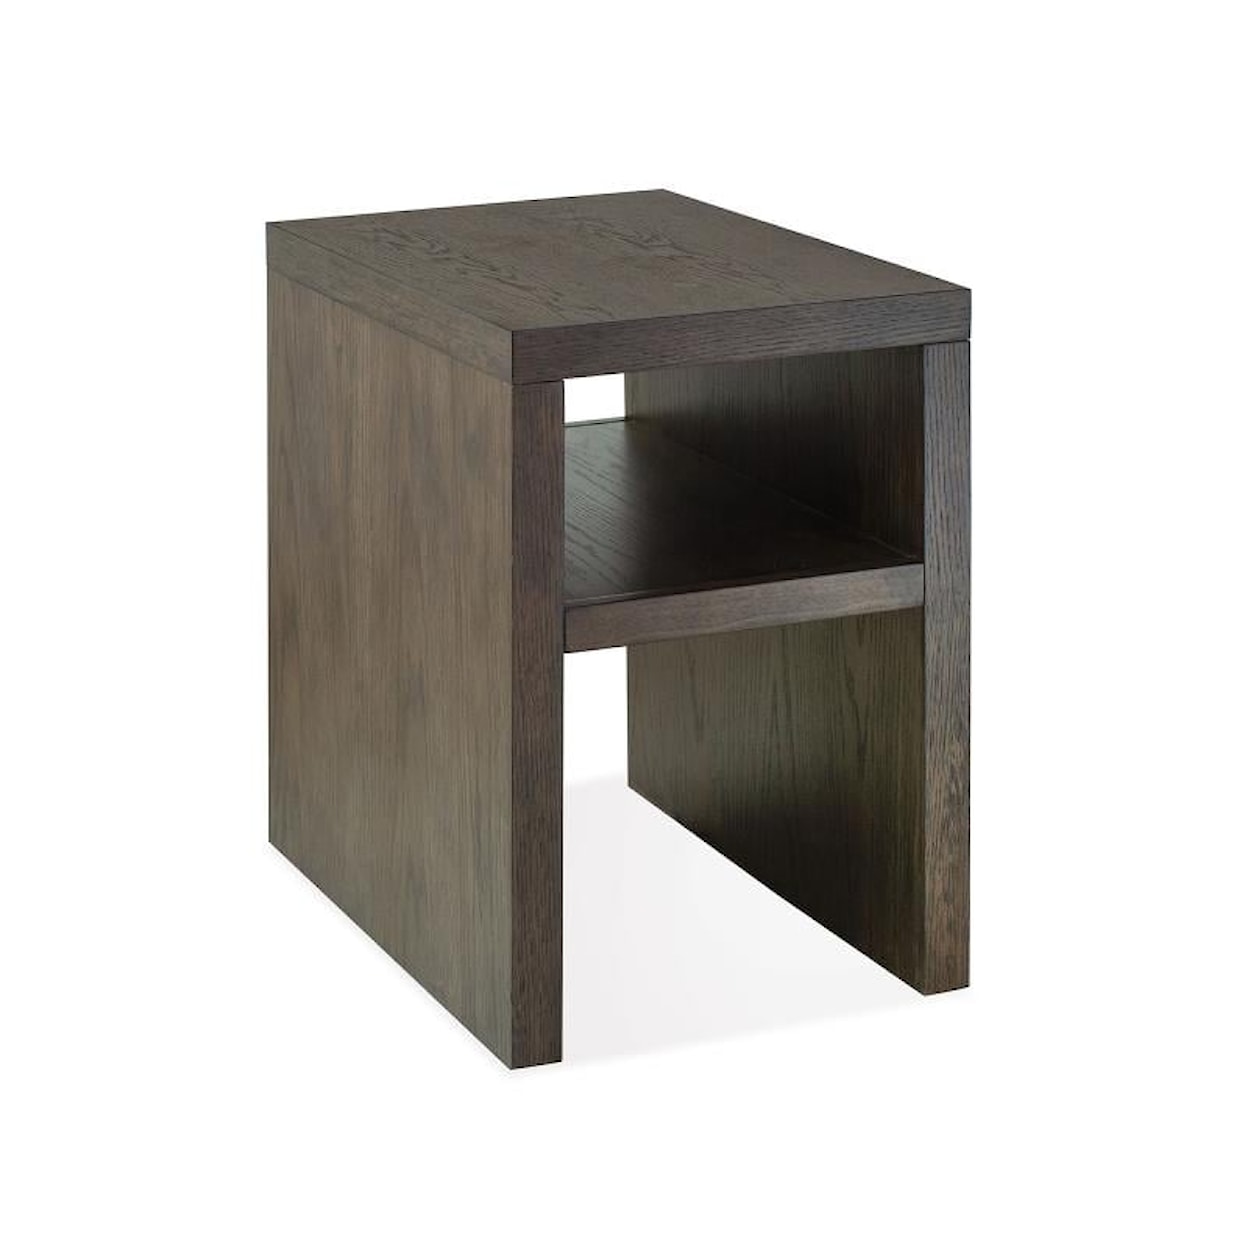 Magnussen Home Merrick Occasional Tables End Table with Open Display Shelf